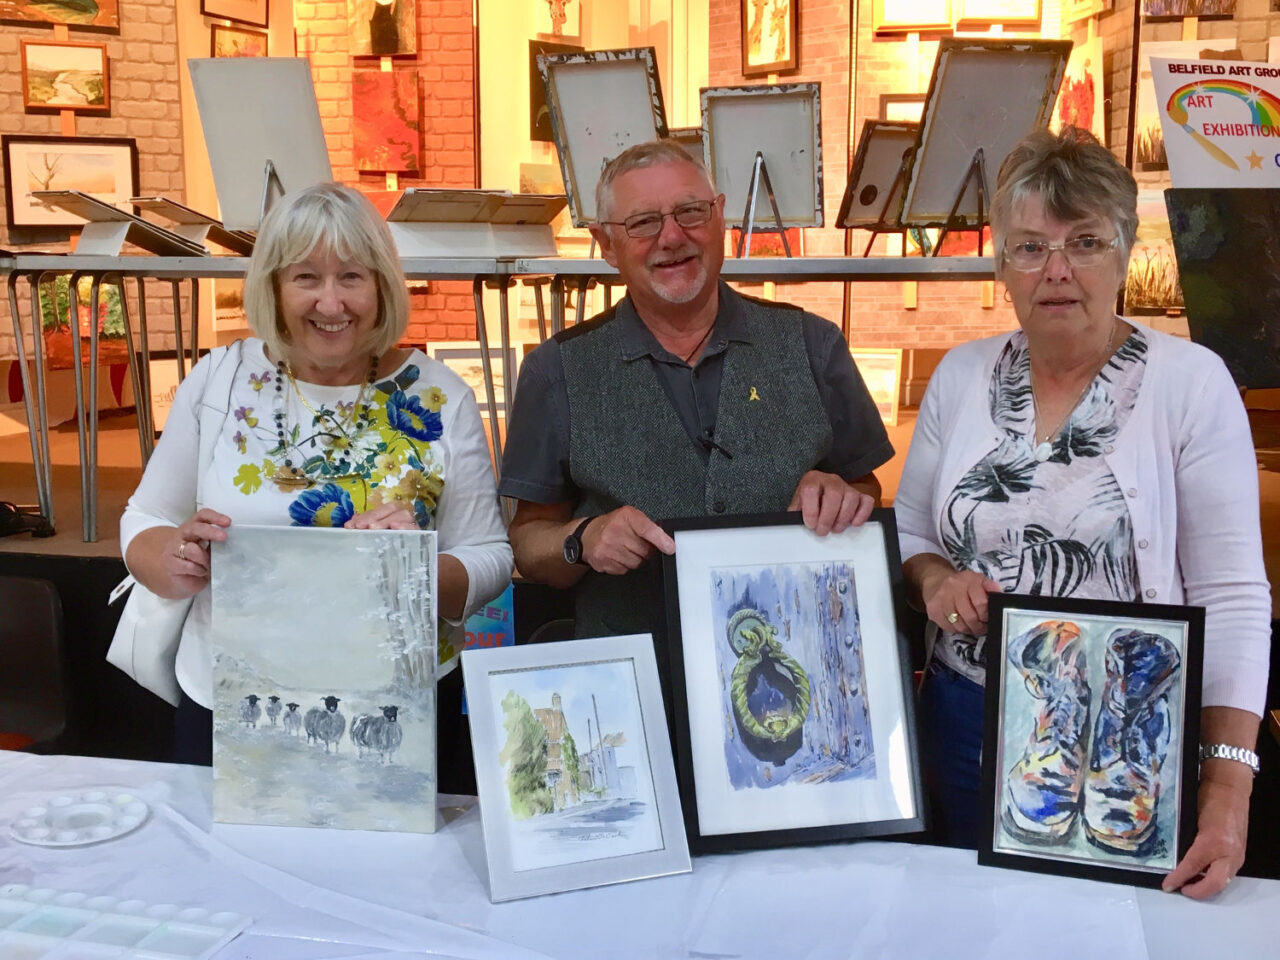 Find Out More: Belfield Art Group (BAG) - Milnrow & Newhey